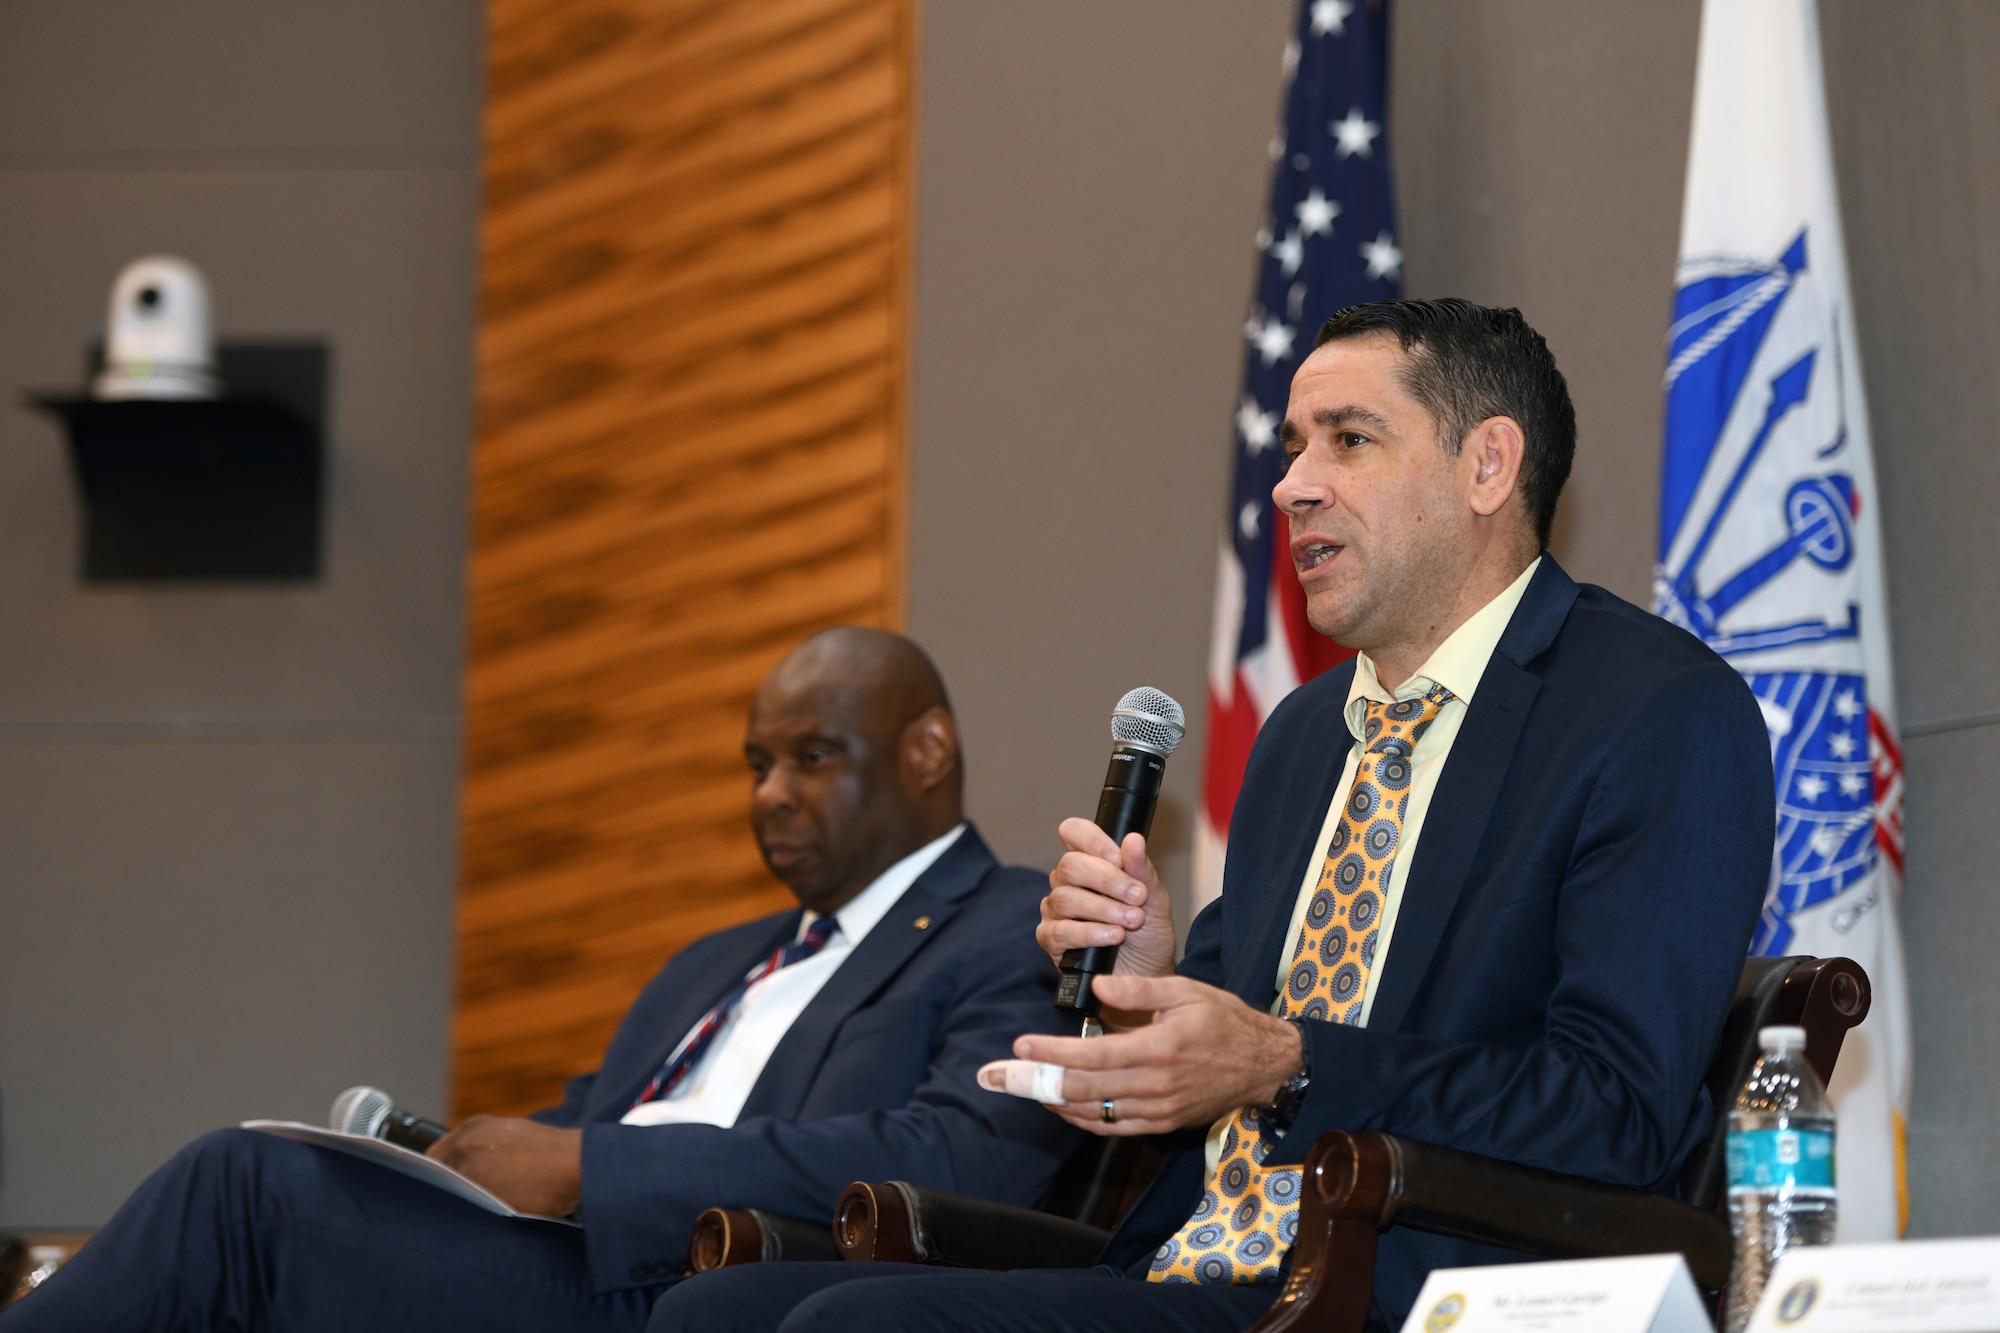 Leonel Garciga, chief information officer for the Army, illustrates a point during a townhall discussion about cybersecurity Oct. 19, 2023, at the Herbert R. Temple Jr. Army National Guard Readiness Center, Arlington Hall Station, Virginia. The event was hosted by the National Guard Bureau’s communications and computers directorate.